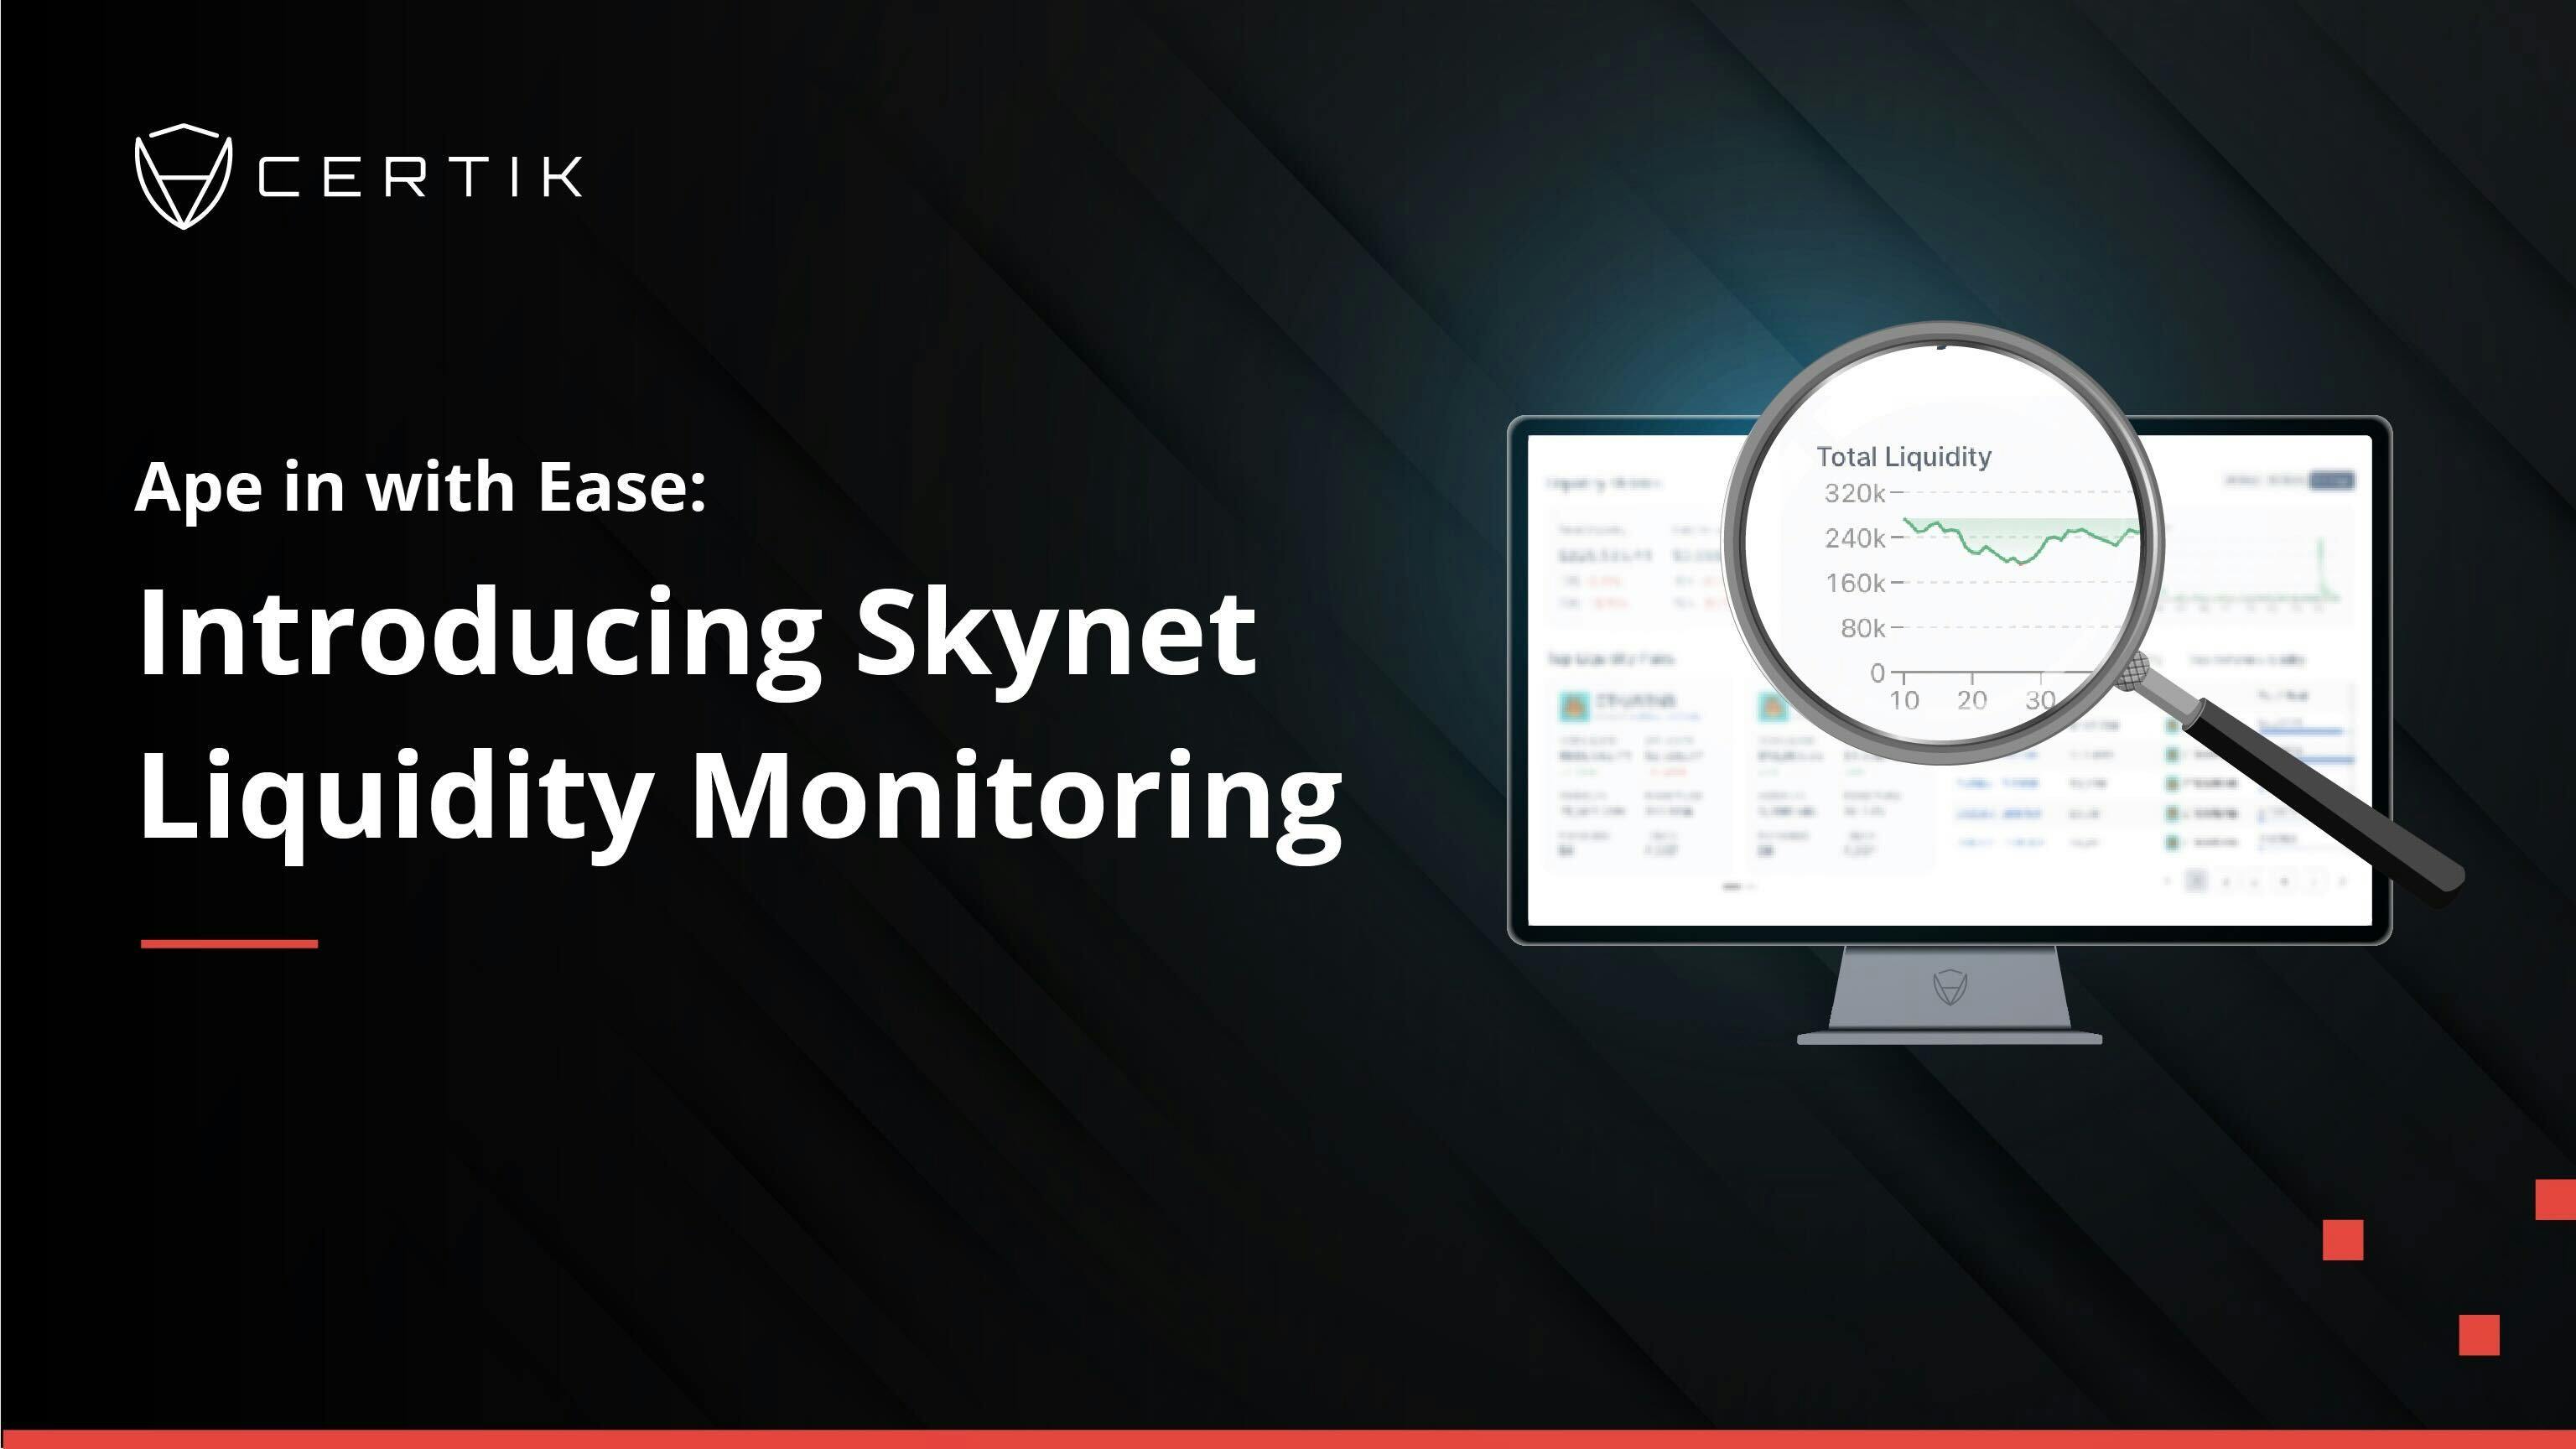 Ape in with Ease with Skynet Liquidity Monitoring